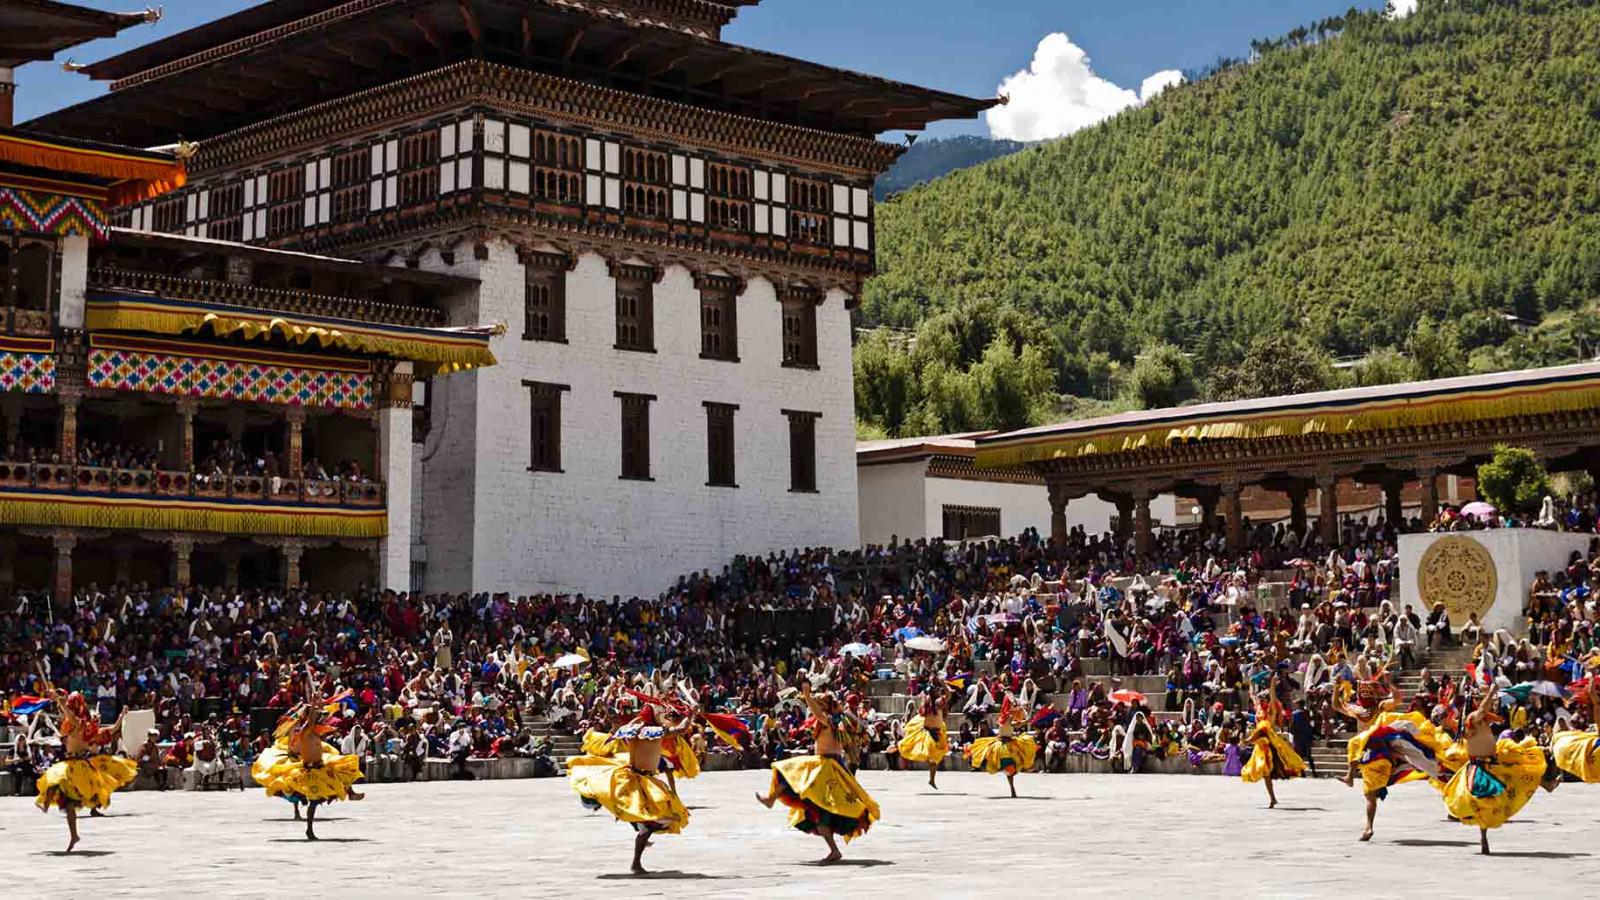 8 snapshots of Bhutanese life we would encourage any visitor to experience